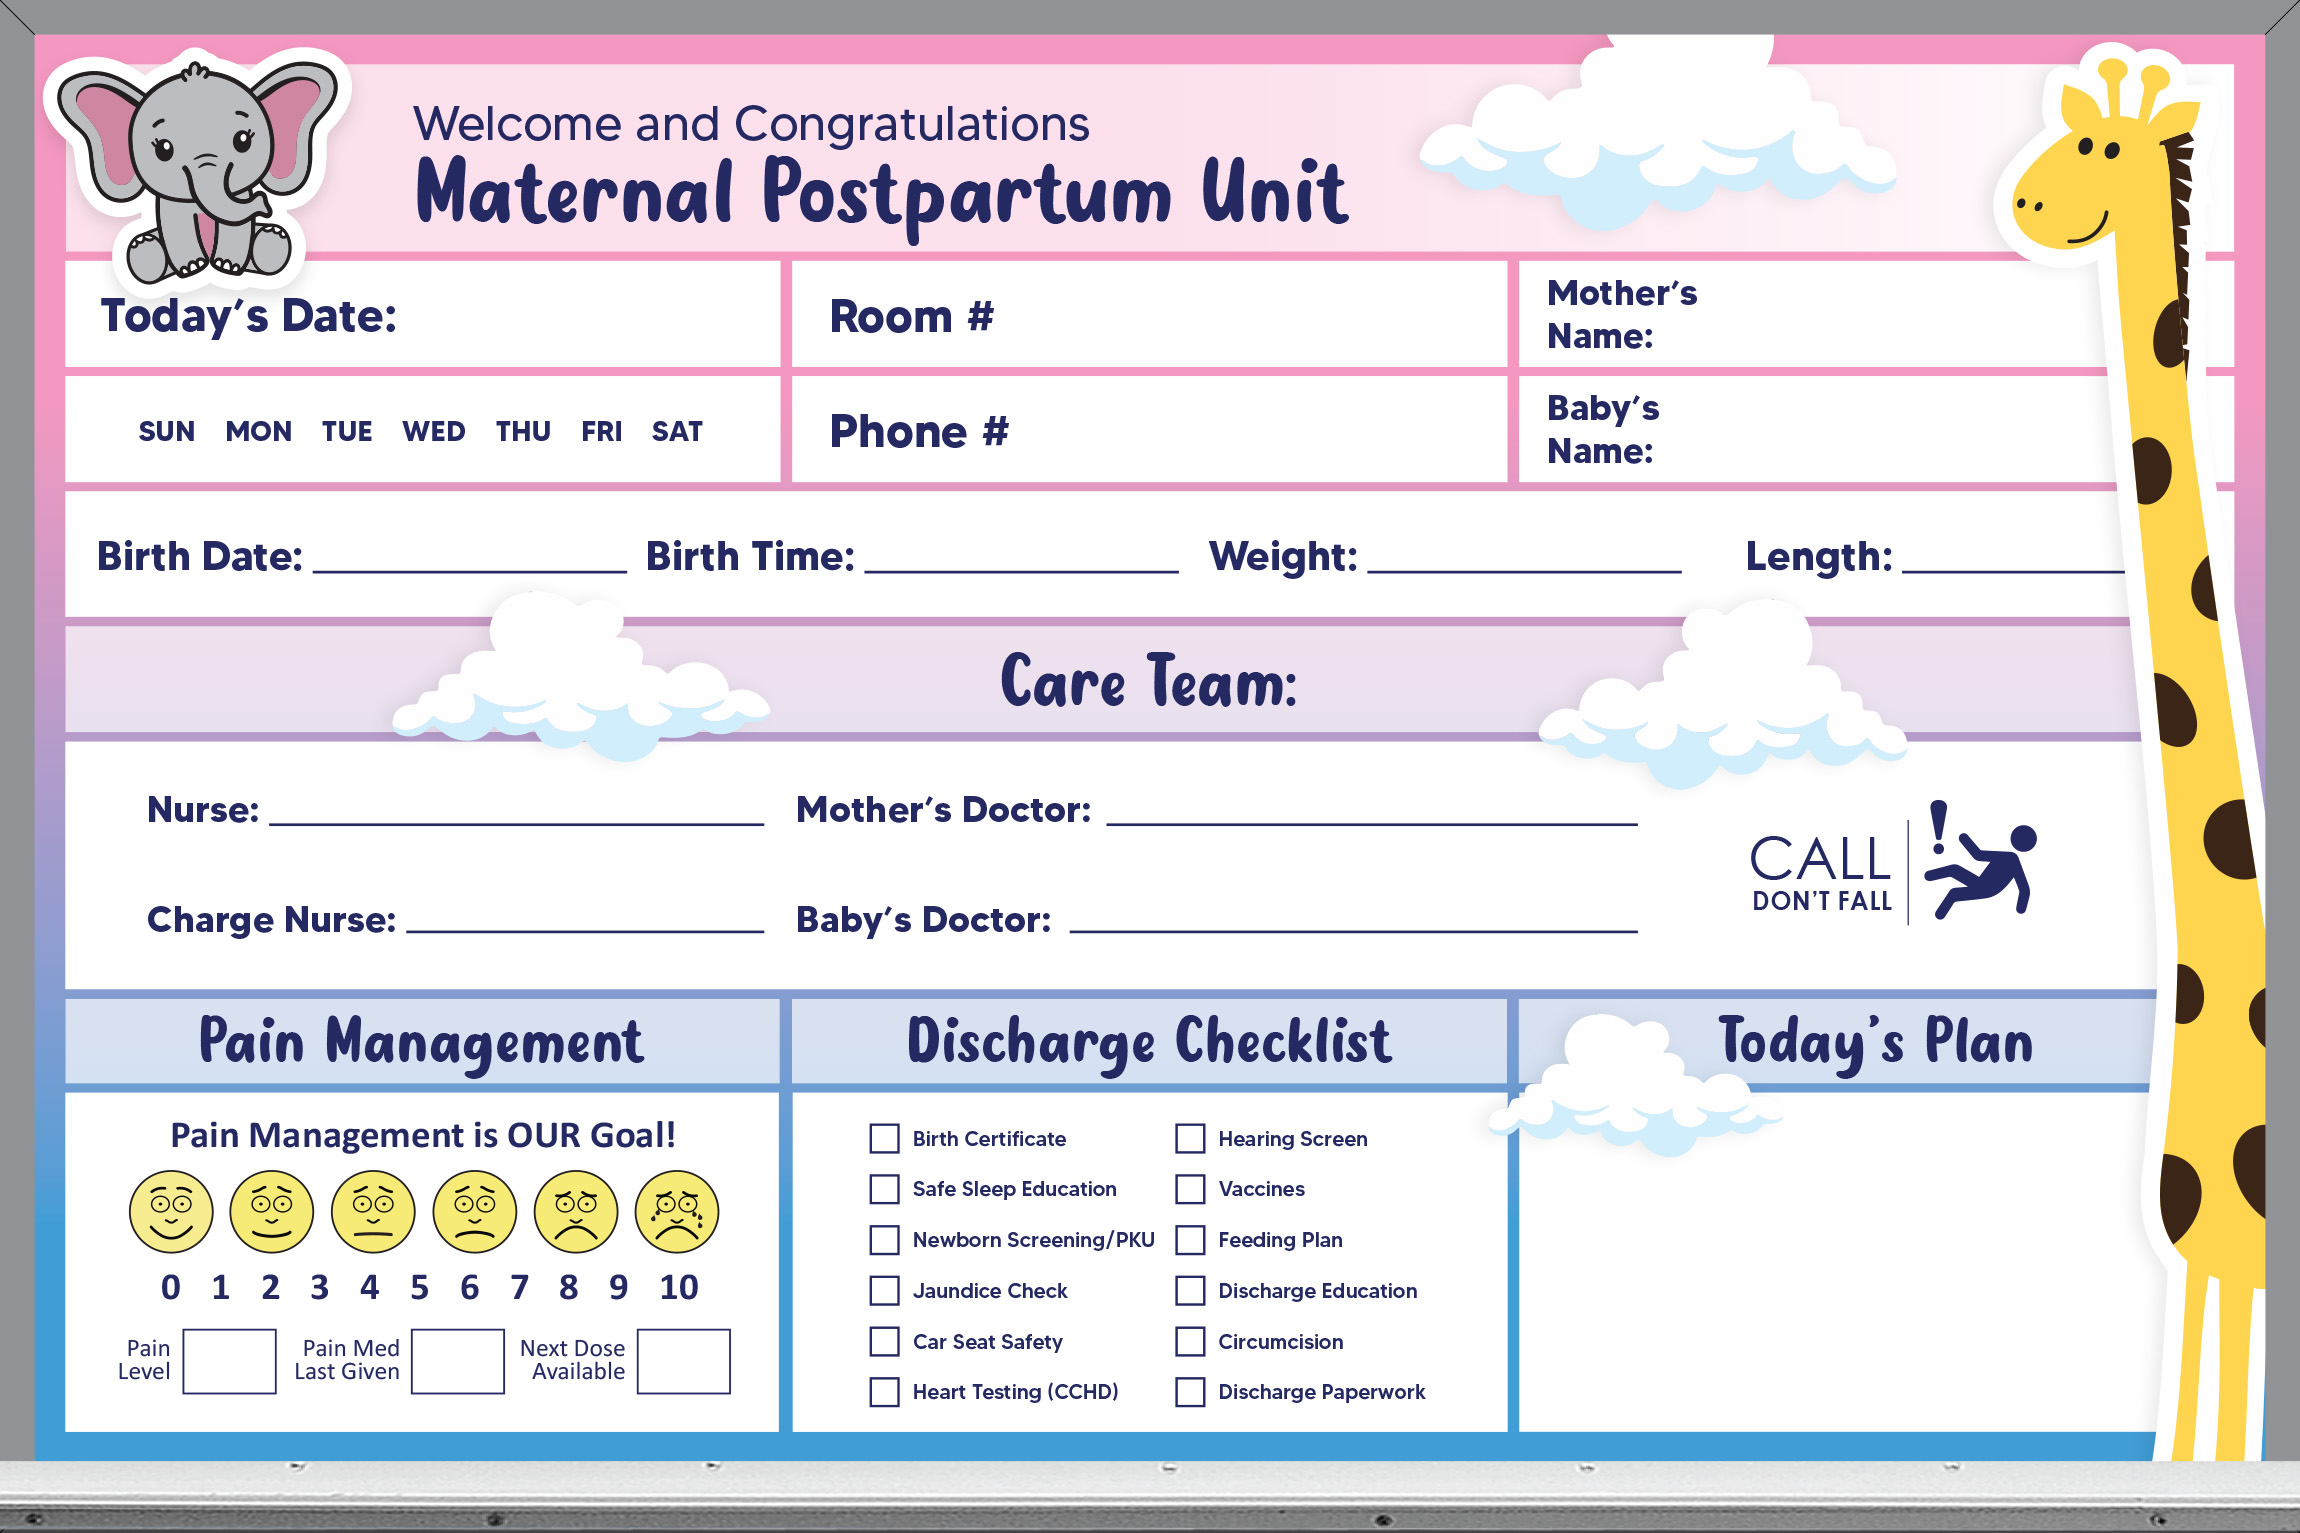 2x3 maternity room whiteboard - pre-printed, pink and blue background